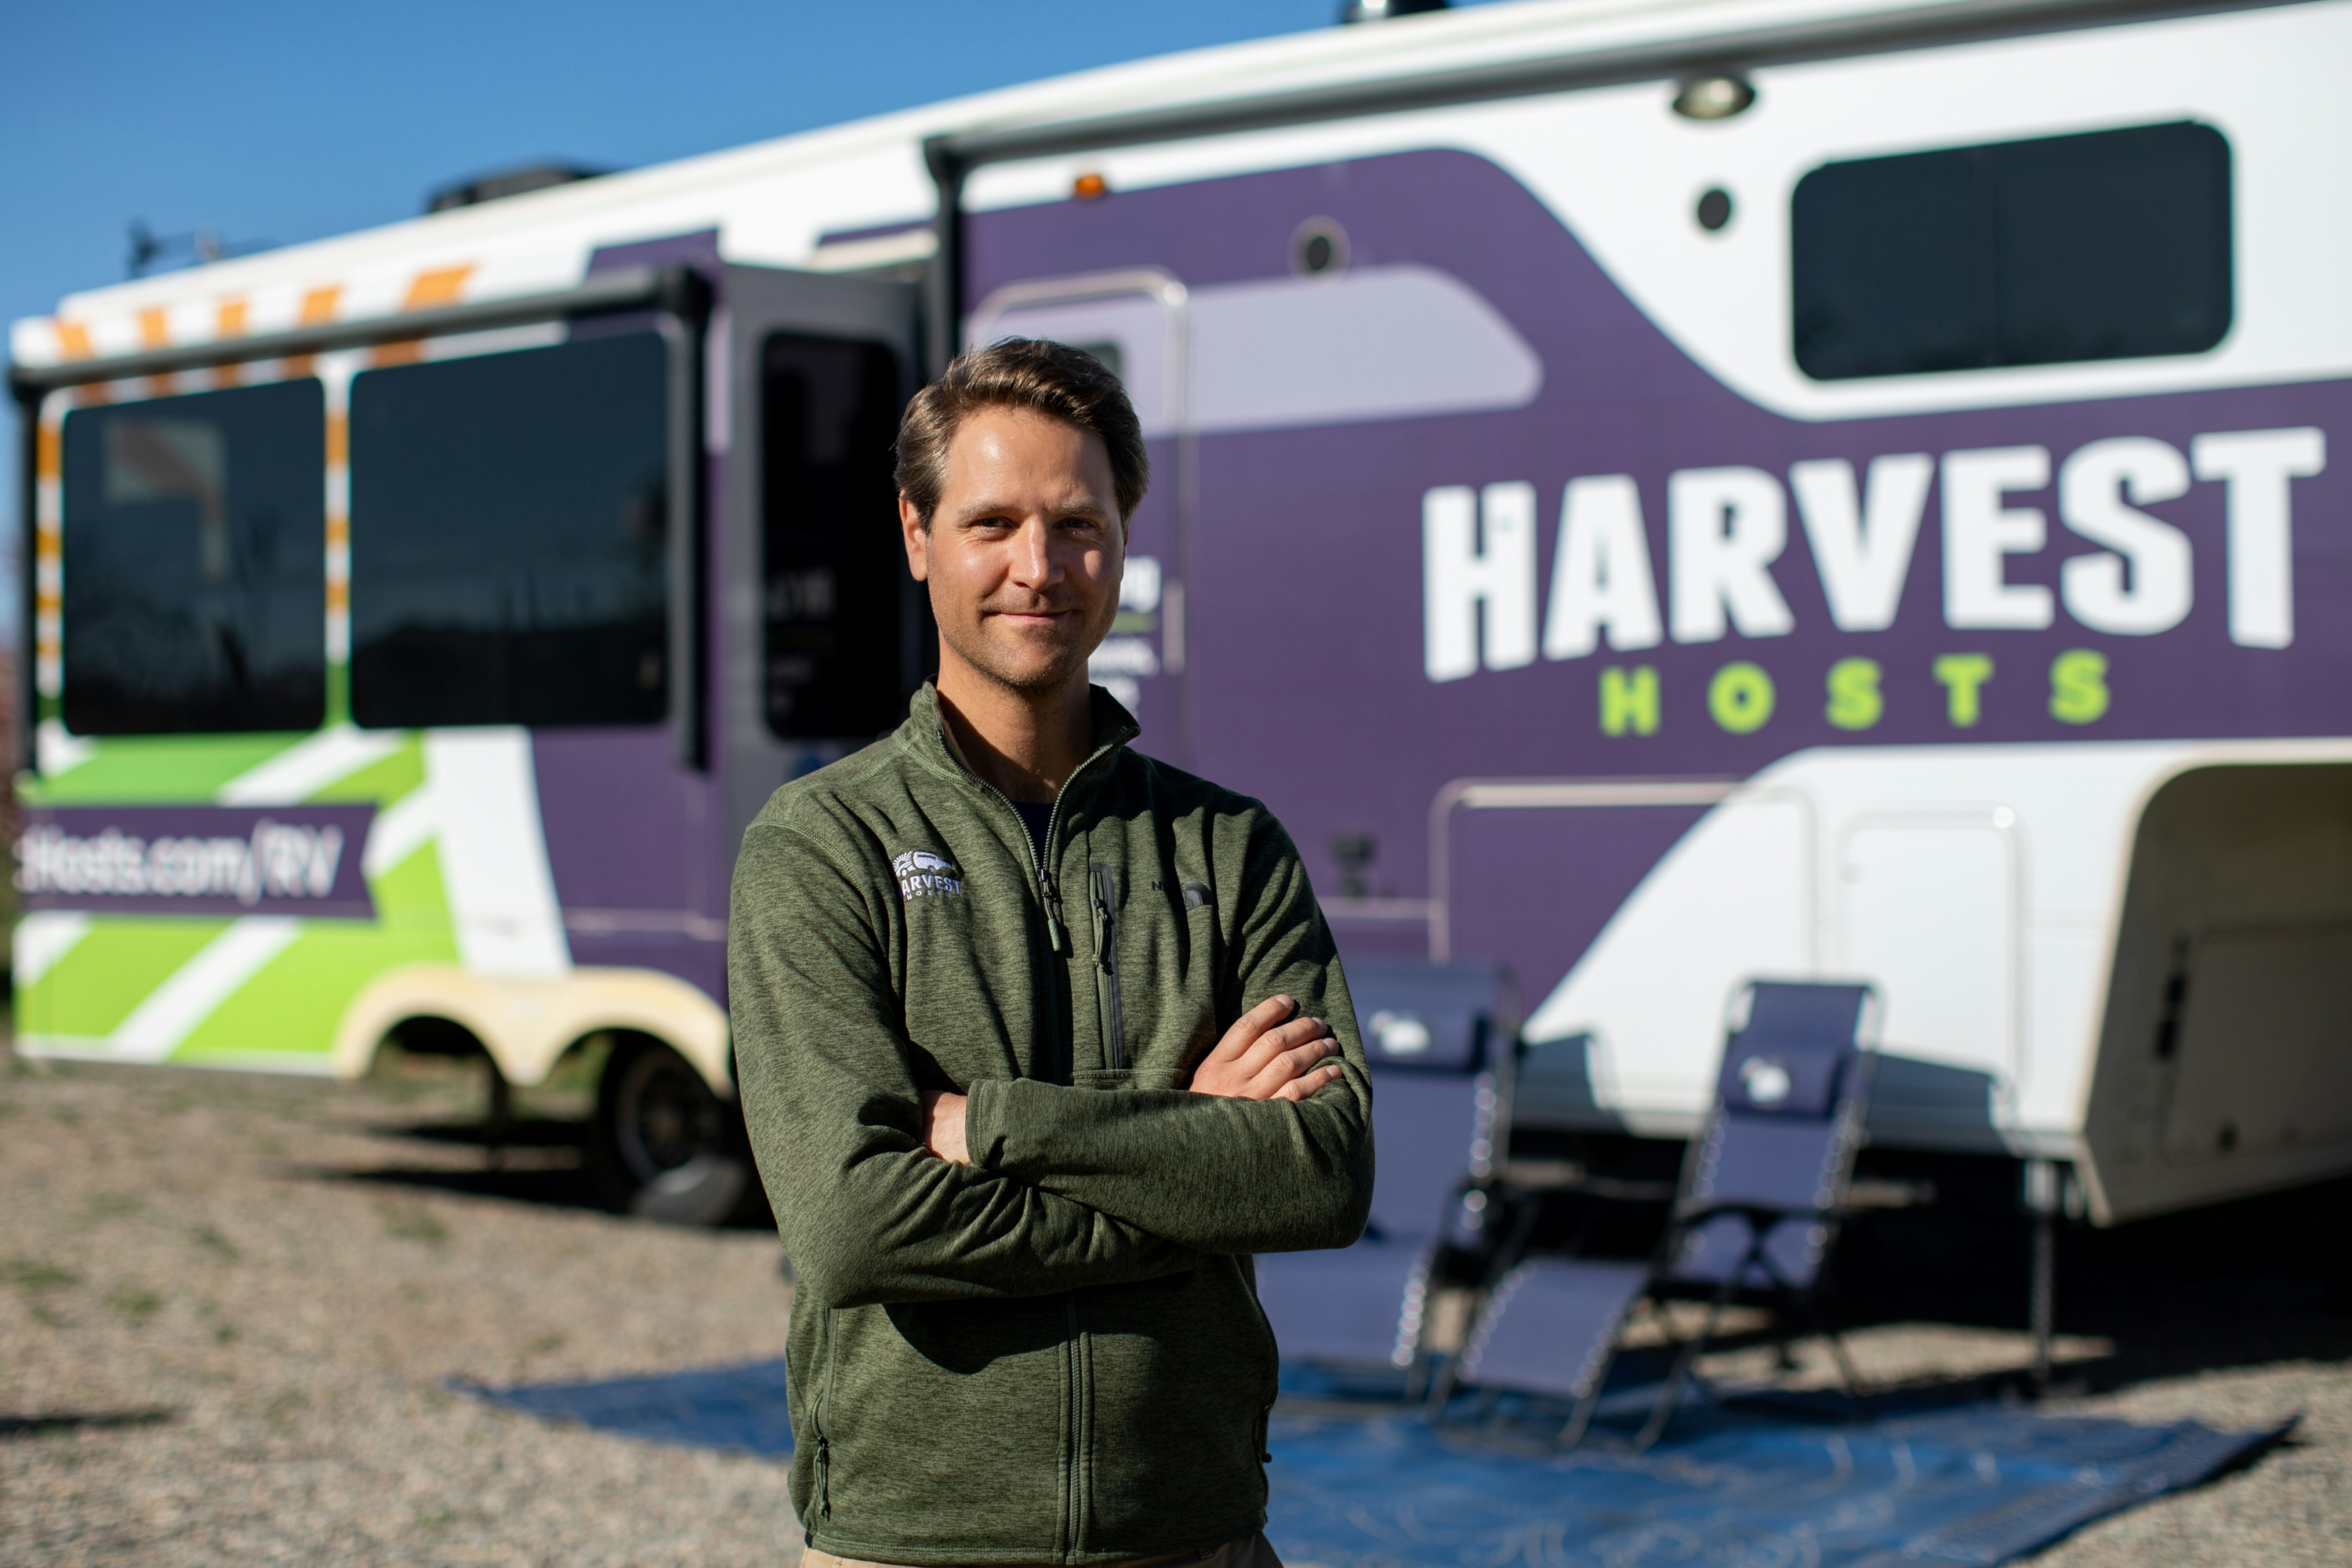 Harvest Hosts Wants to Hire You...to Retire